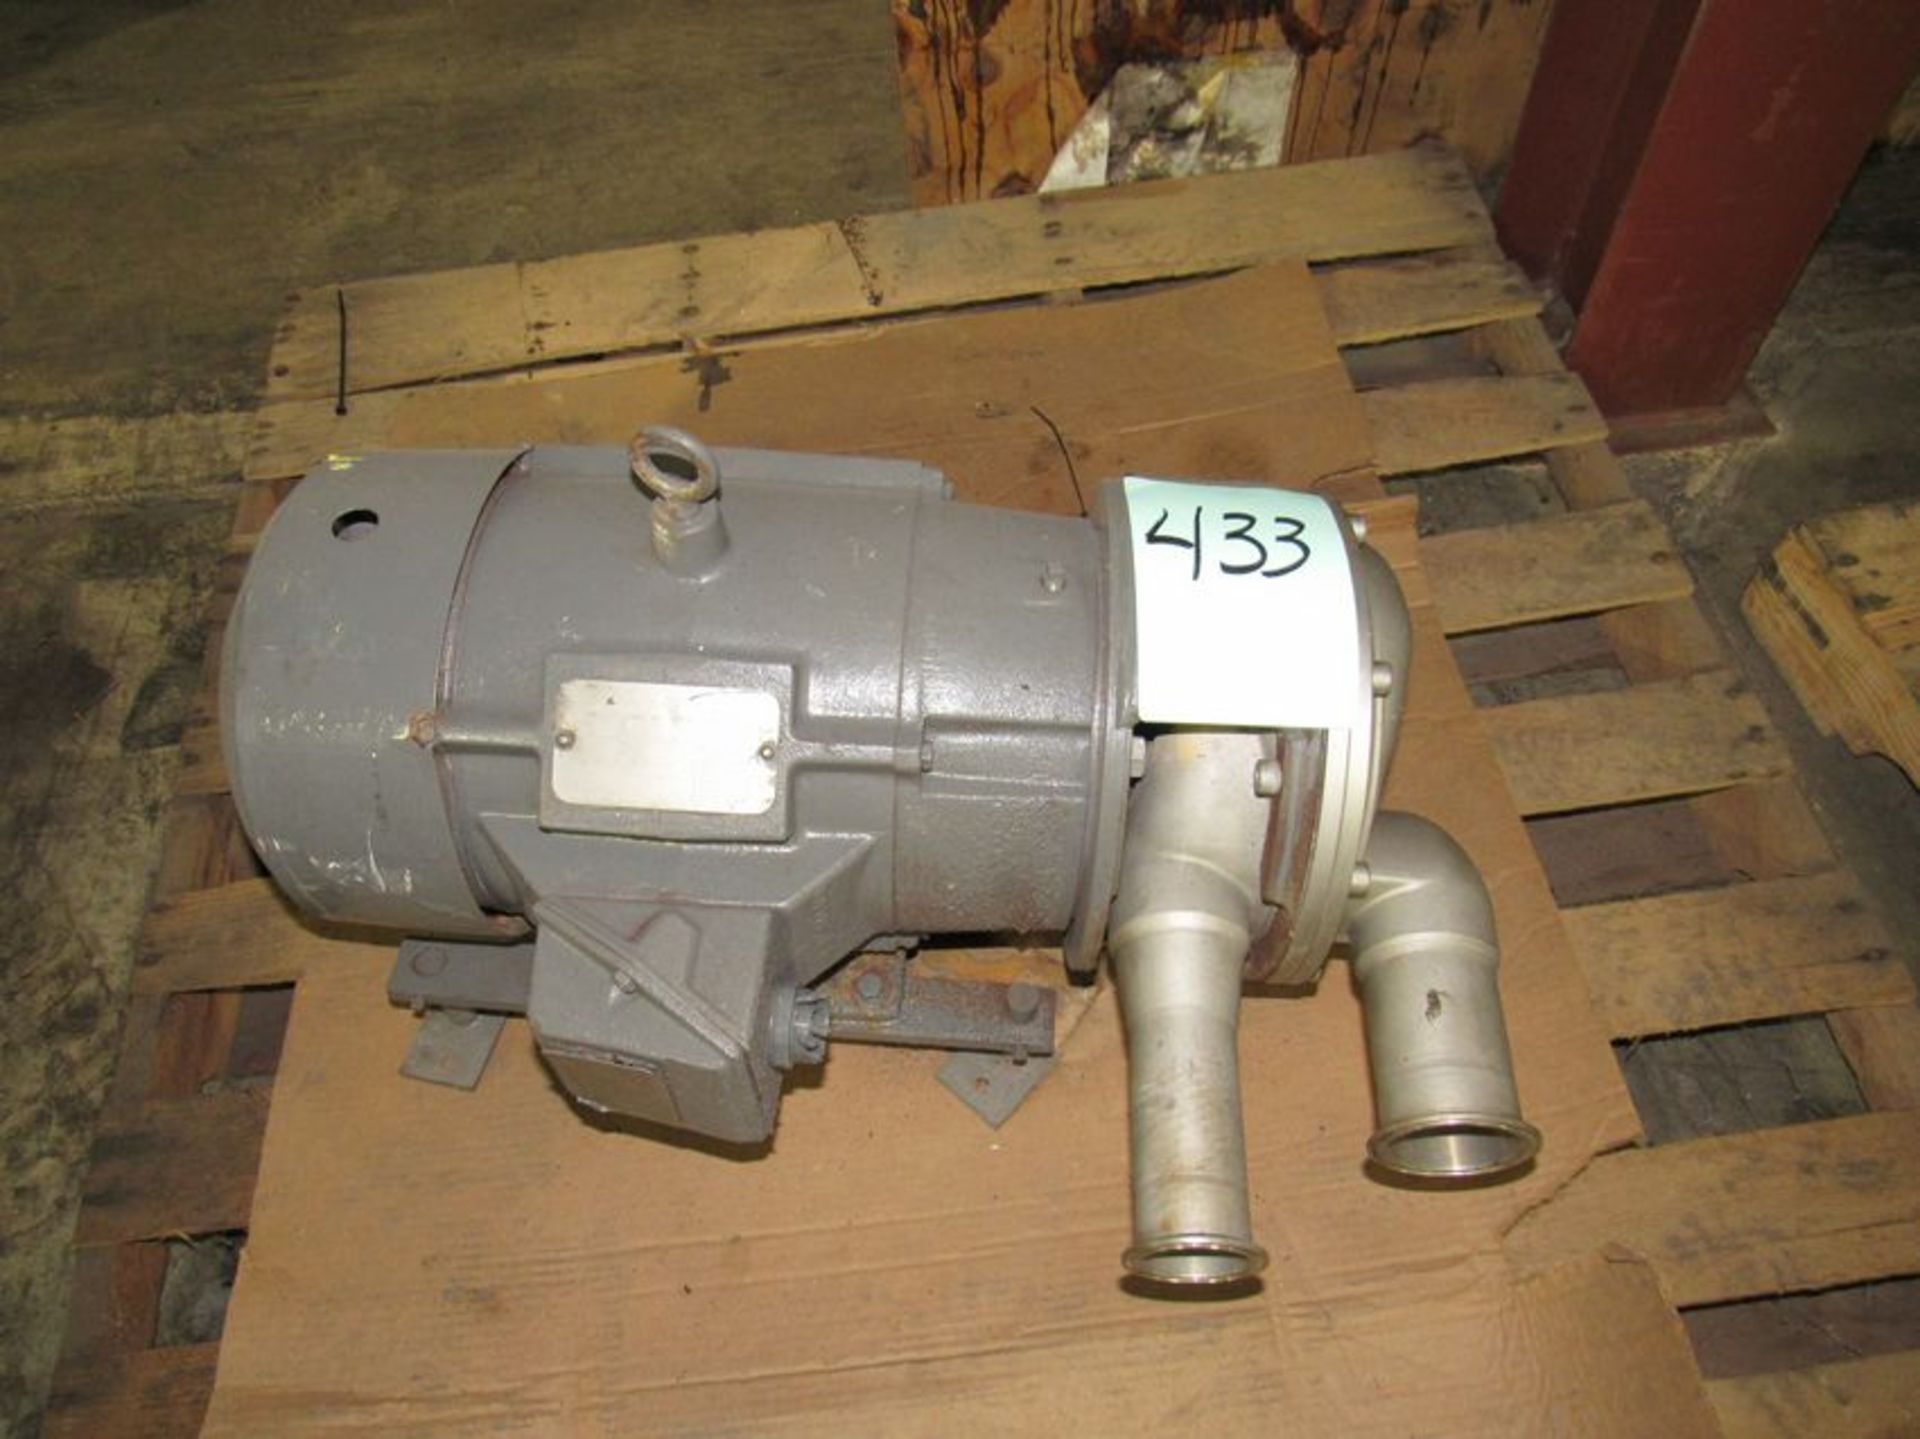 Stainless Steel high volume dynamic pump with parallel inlet/outlet 2.5"inlet and 1.75" outlet; 10HP